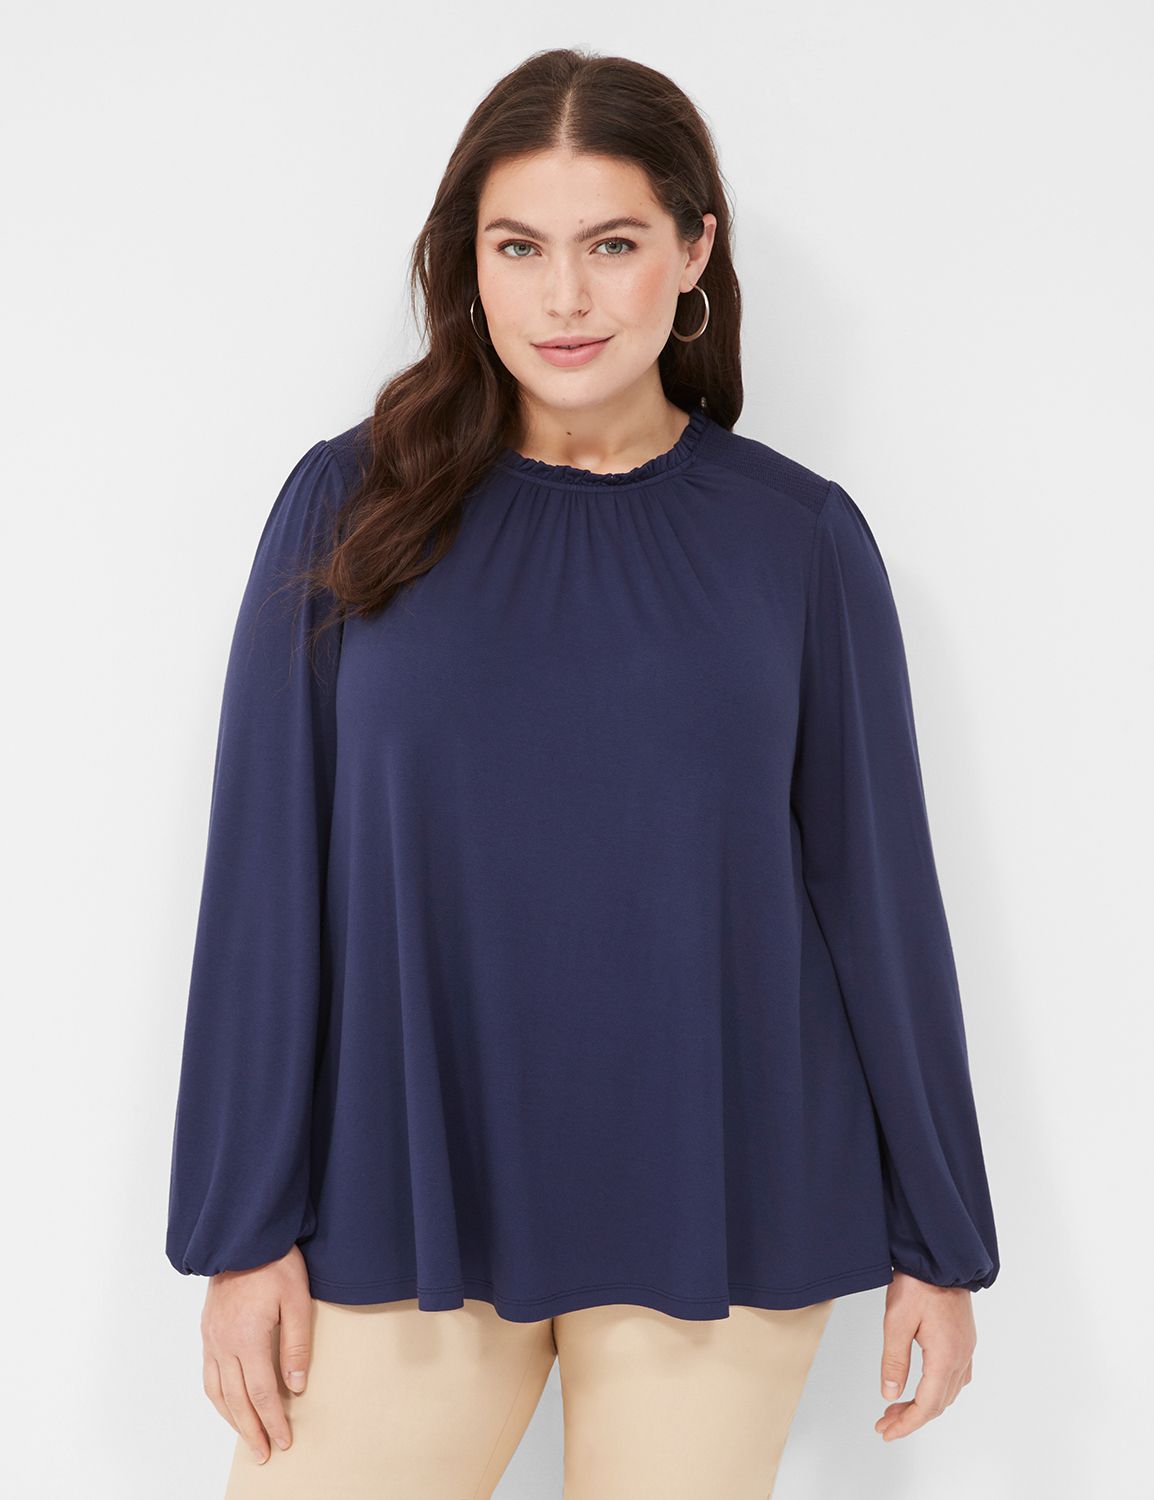 Clearance Sale Plus Size Clothing